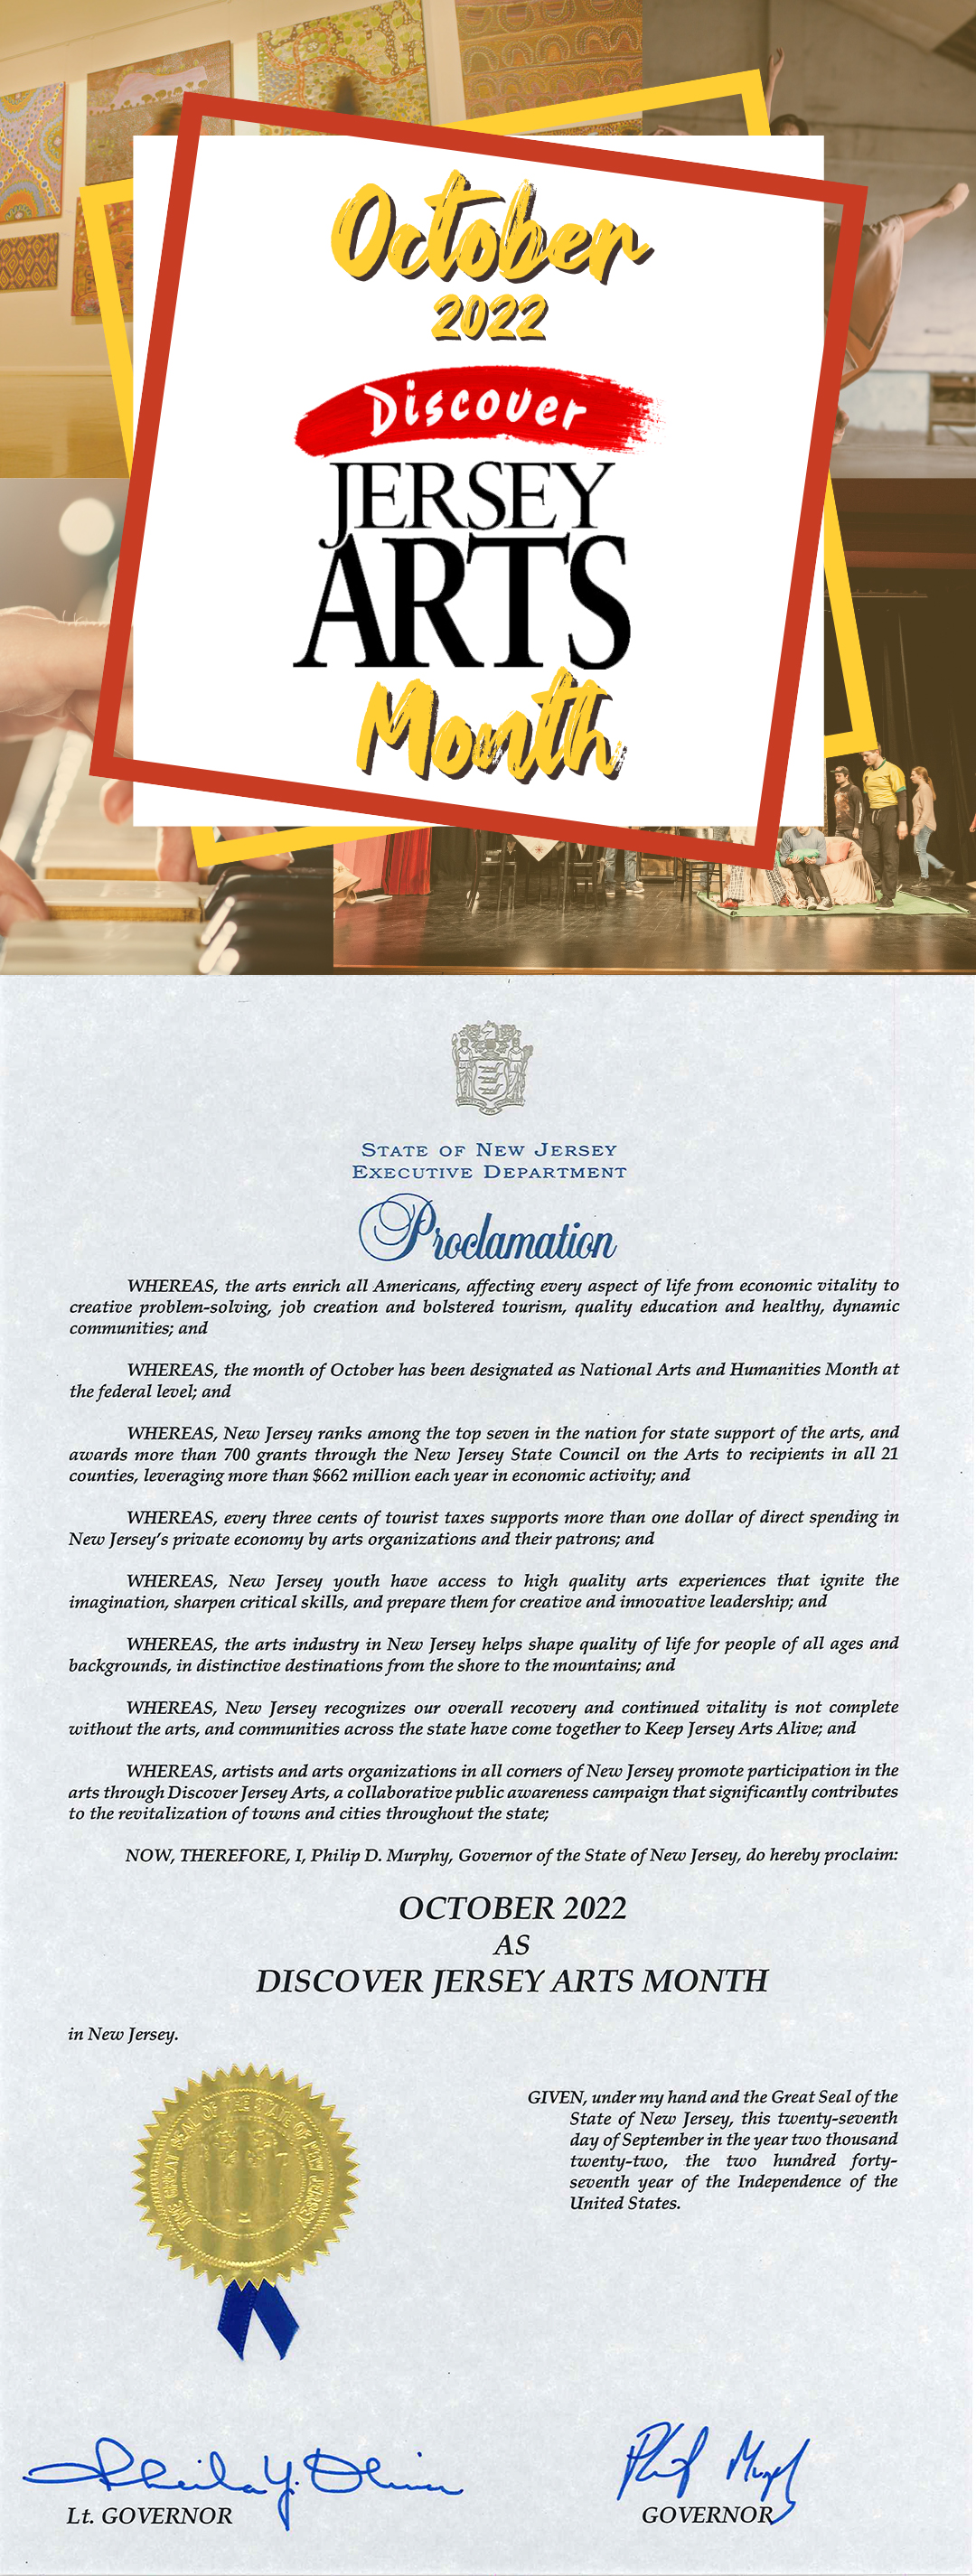 DJA Month logo and proclamation